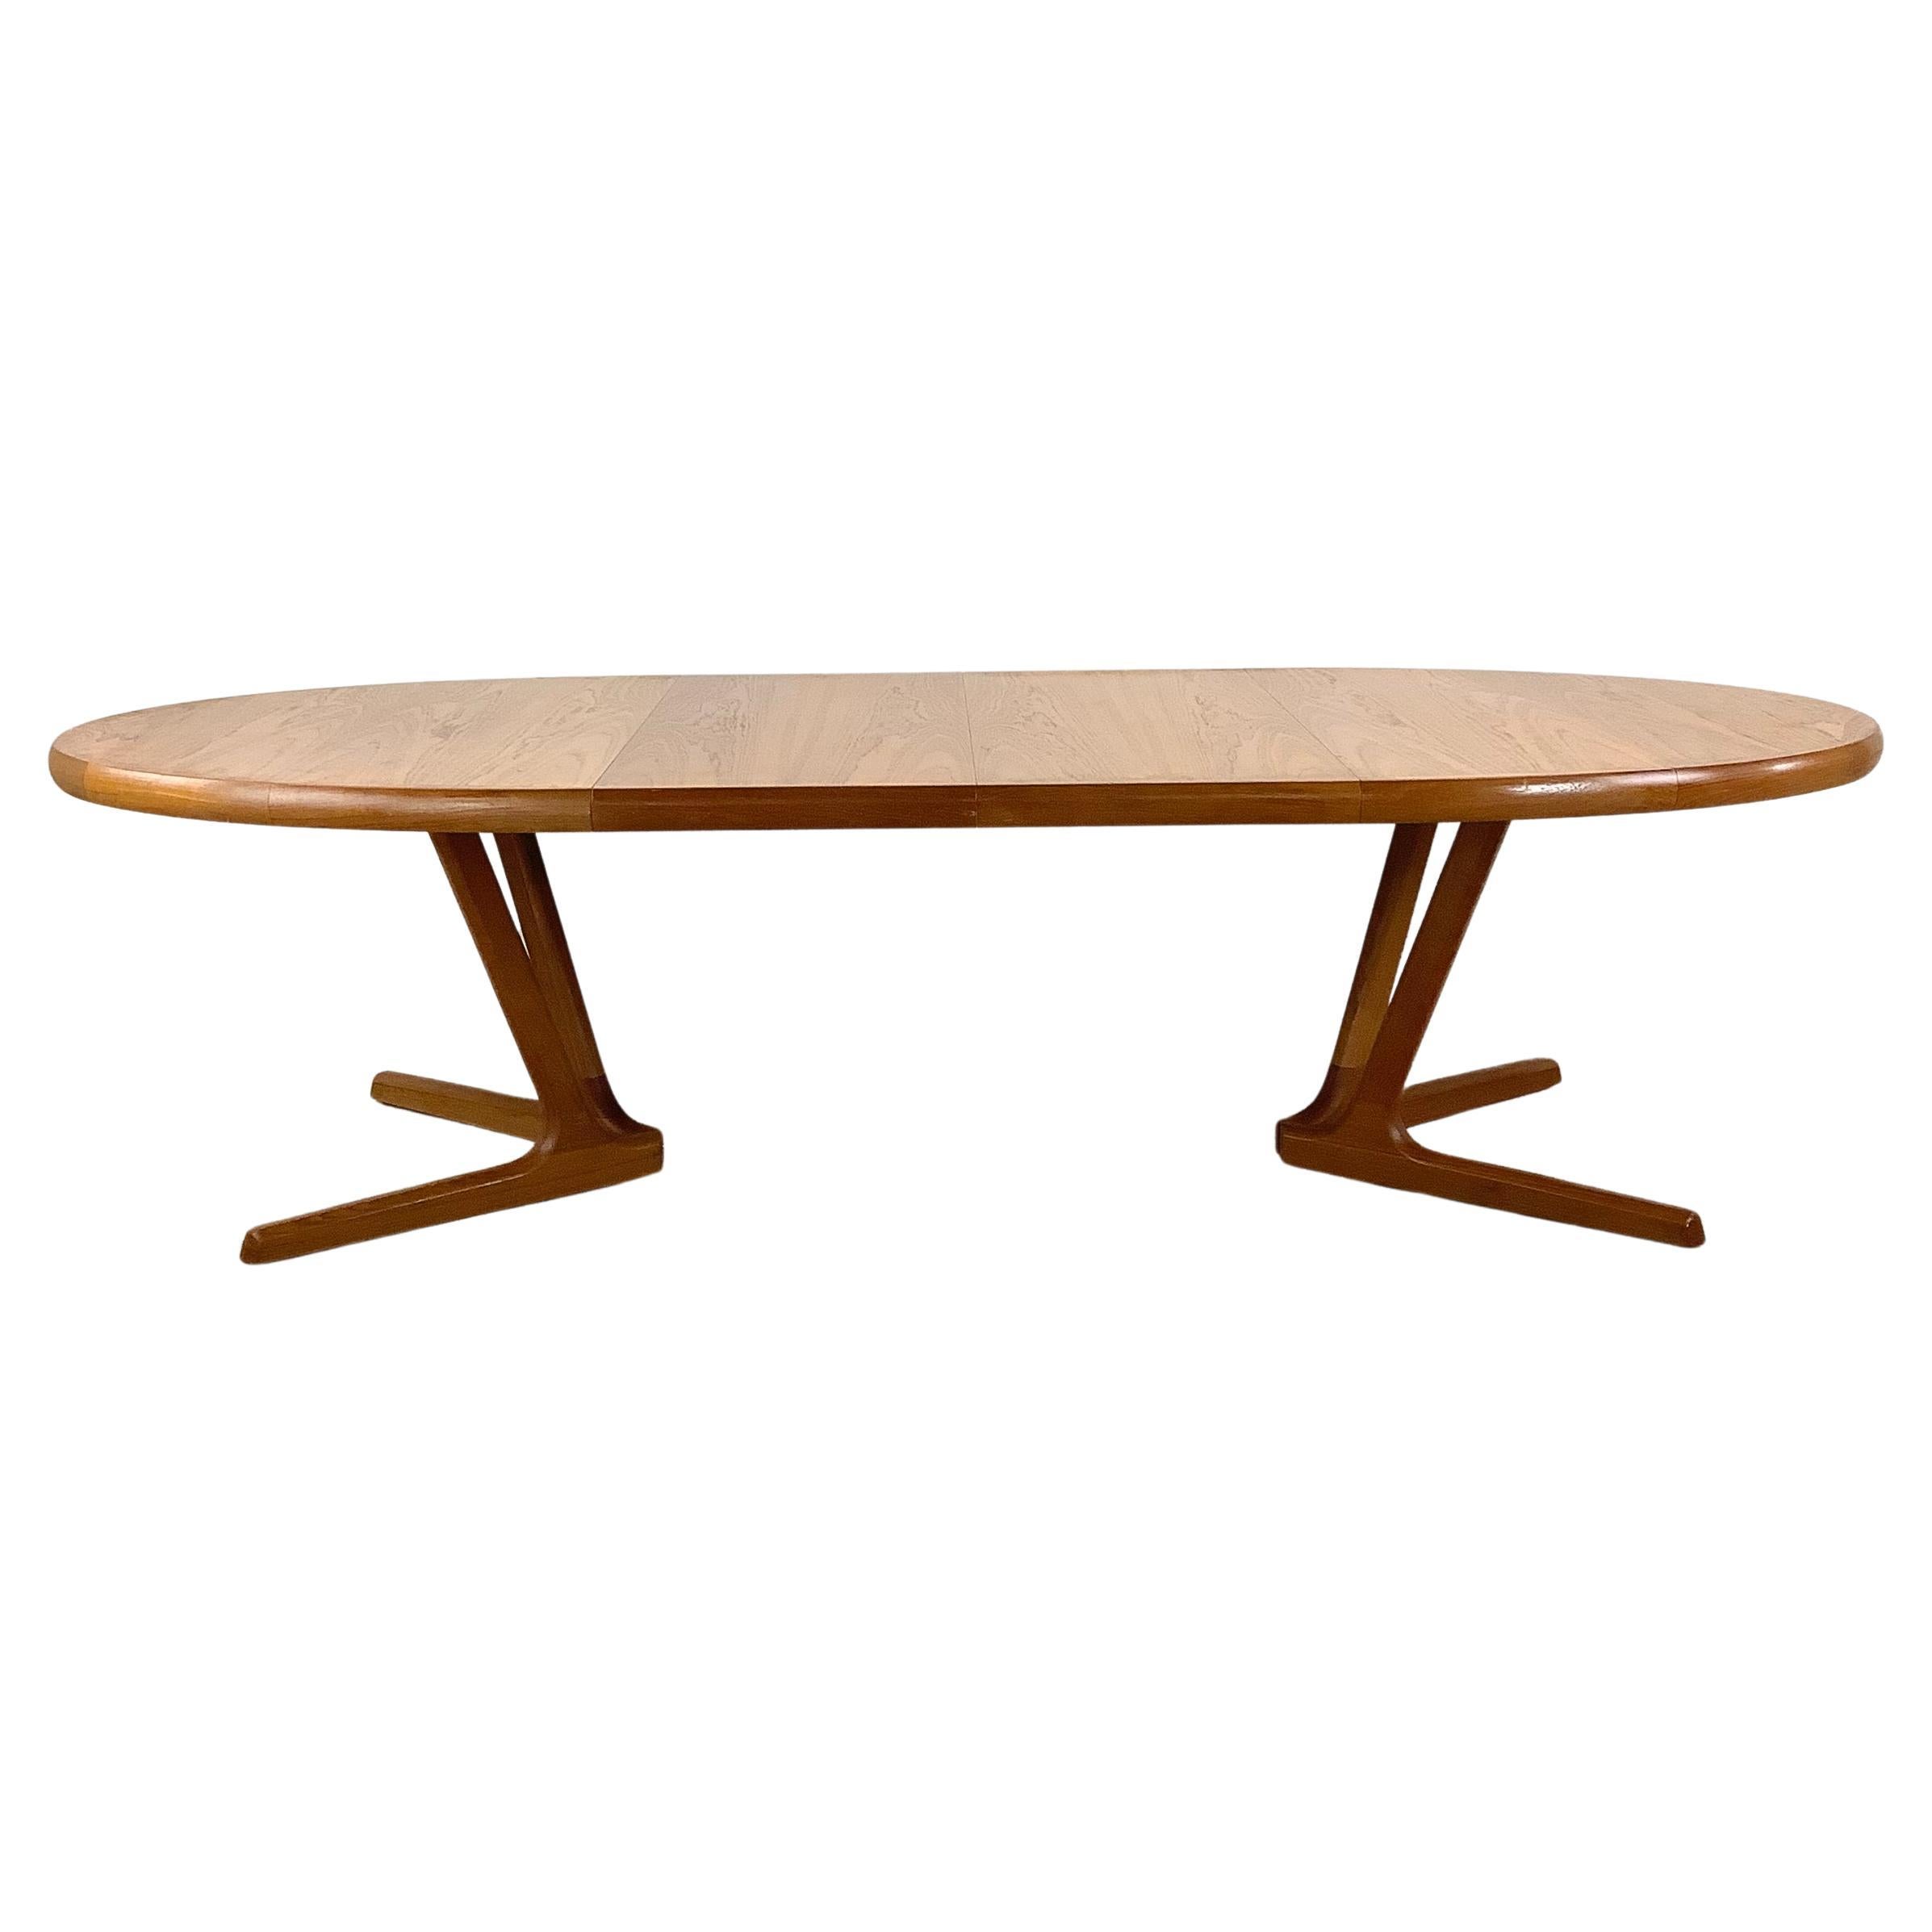 Scandinavian Modern Teak Oval Dining Table With Leaves